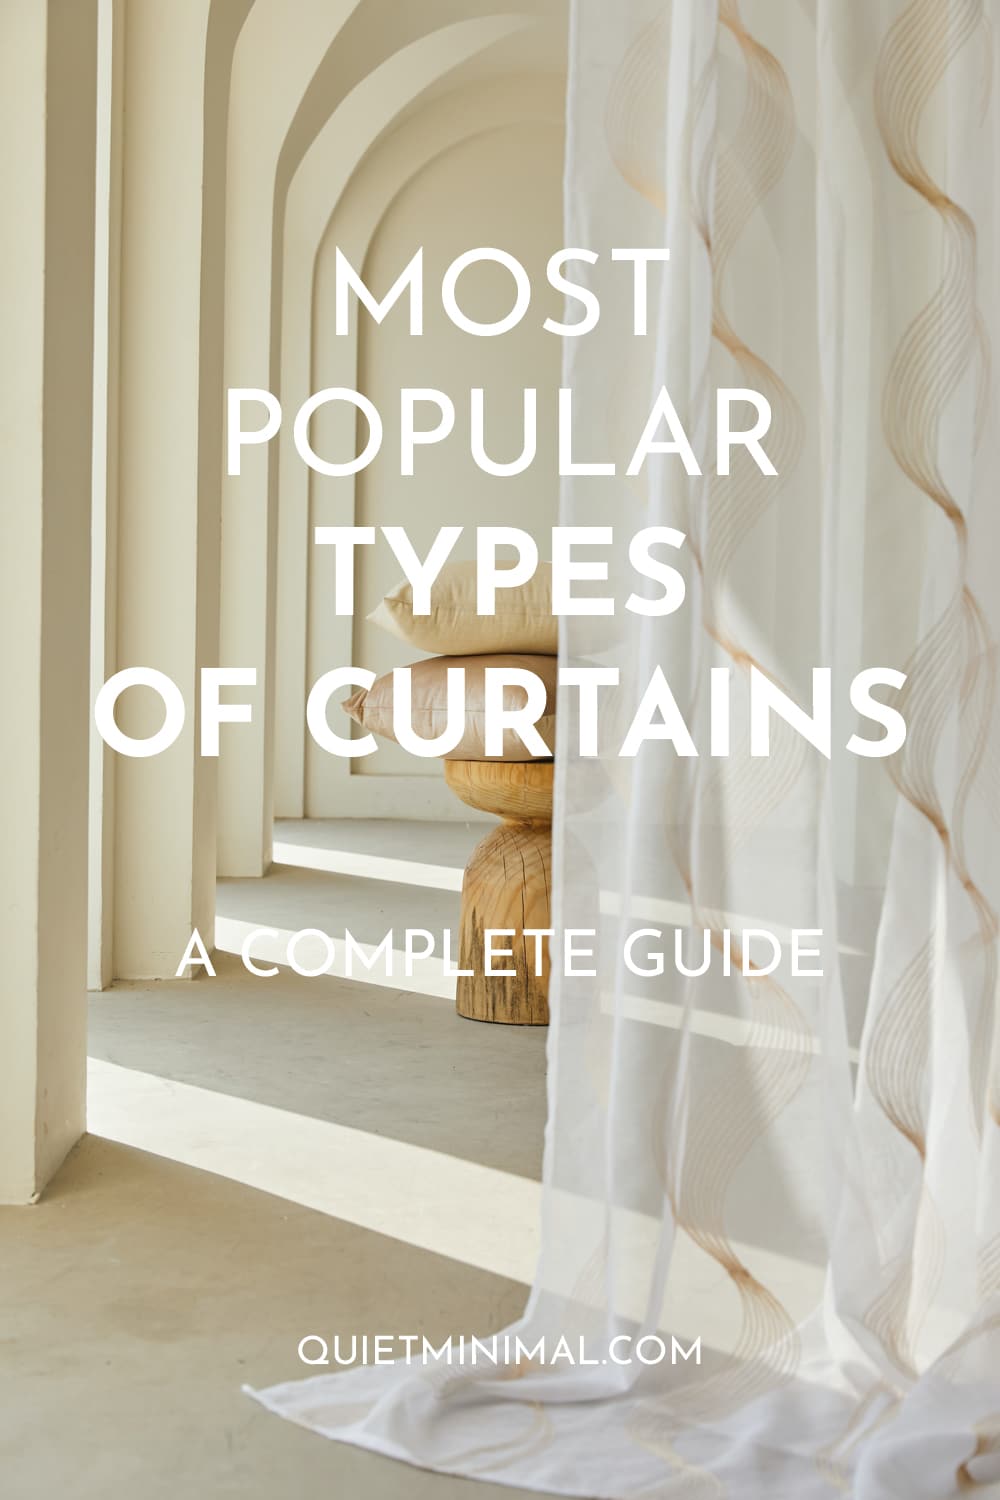 Most popular types of curtains